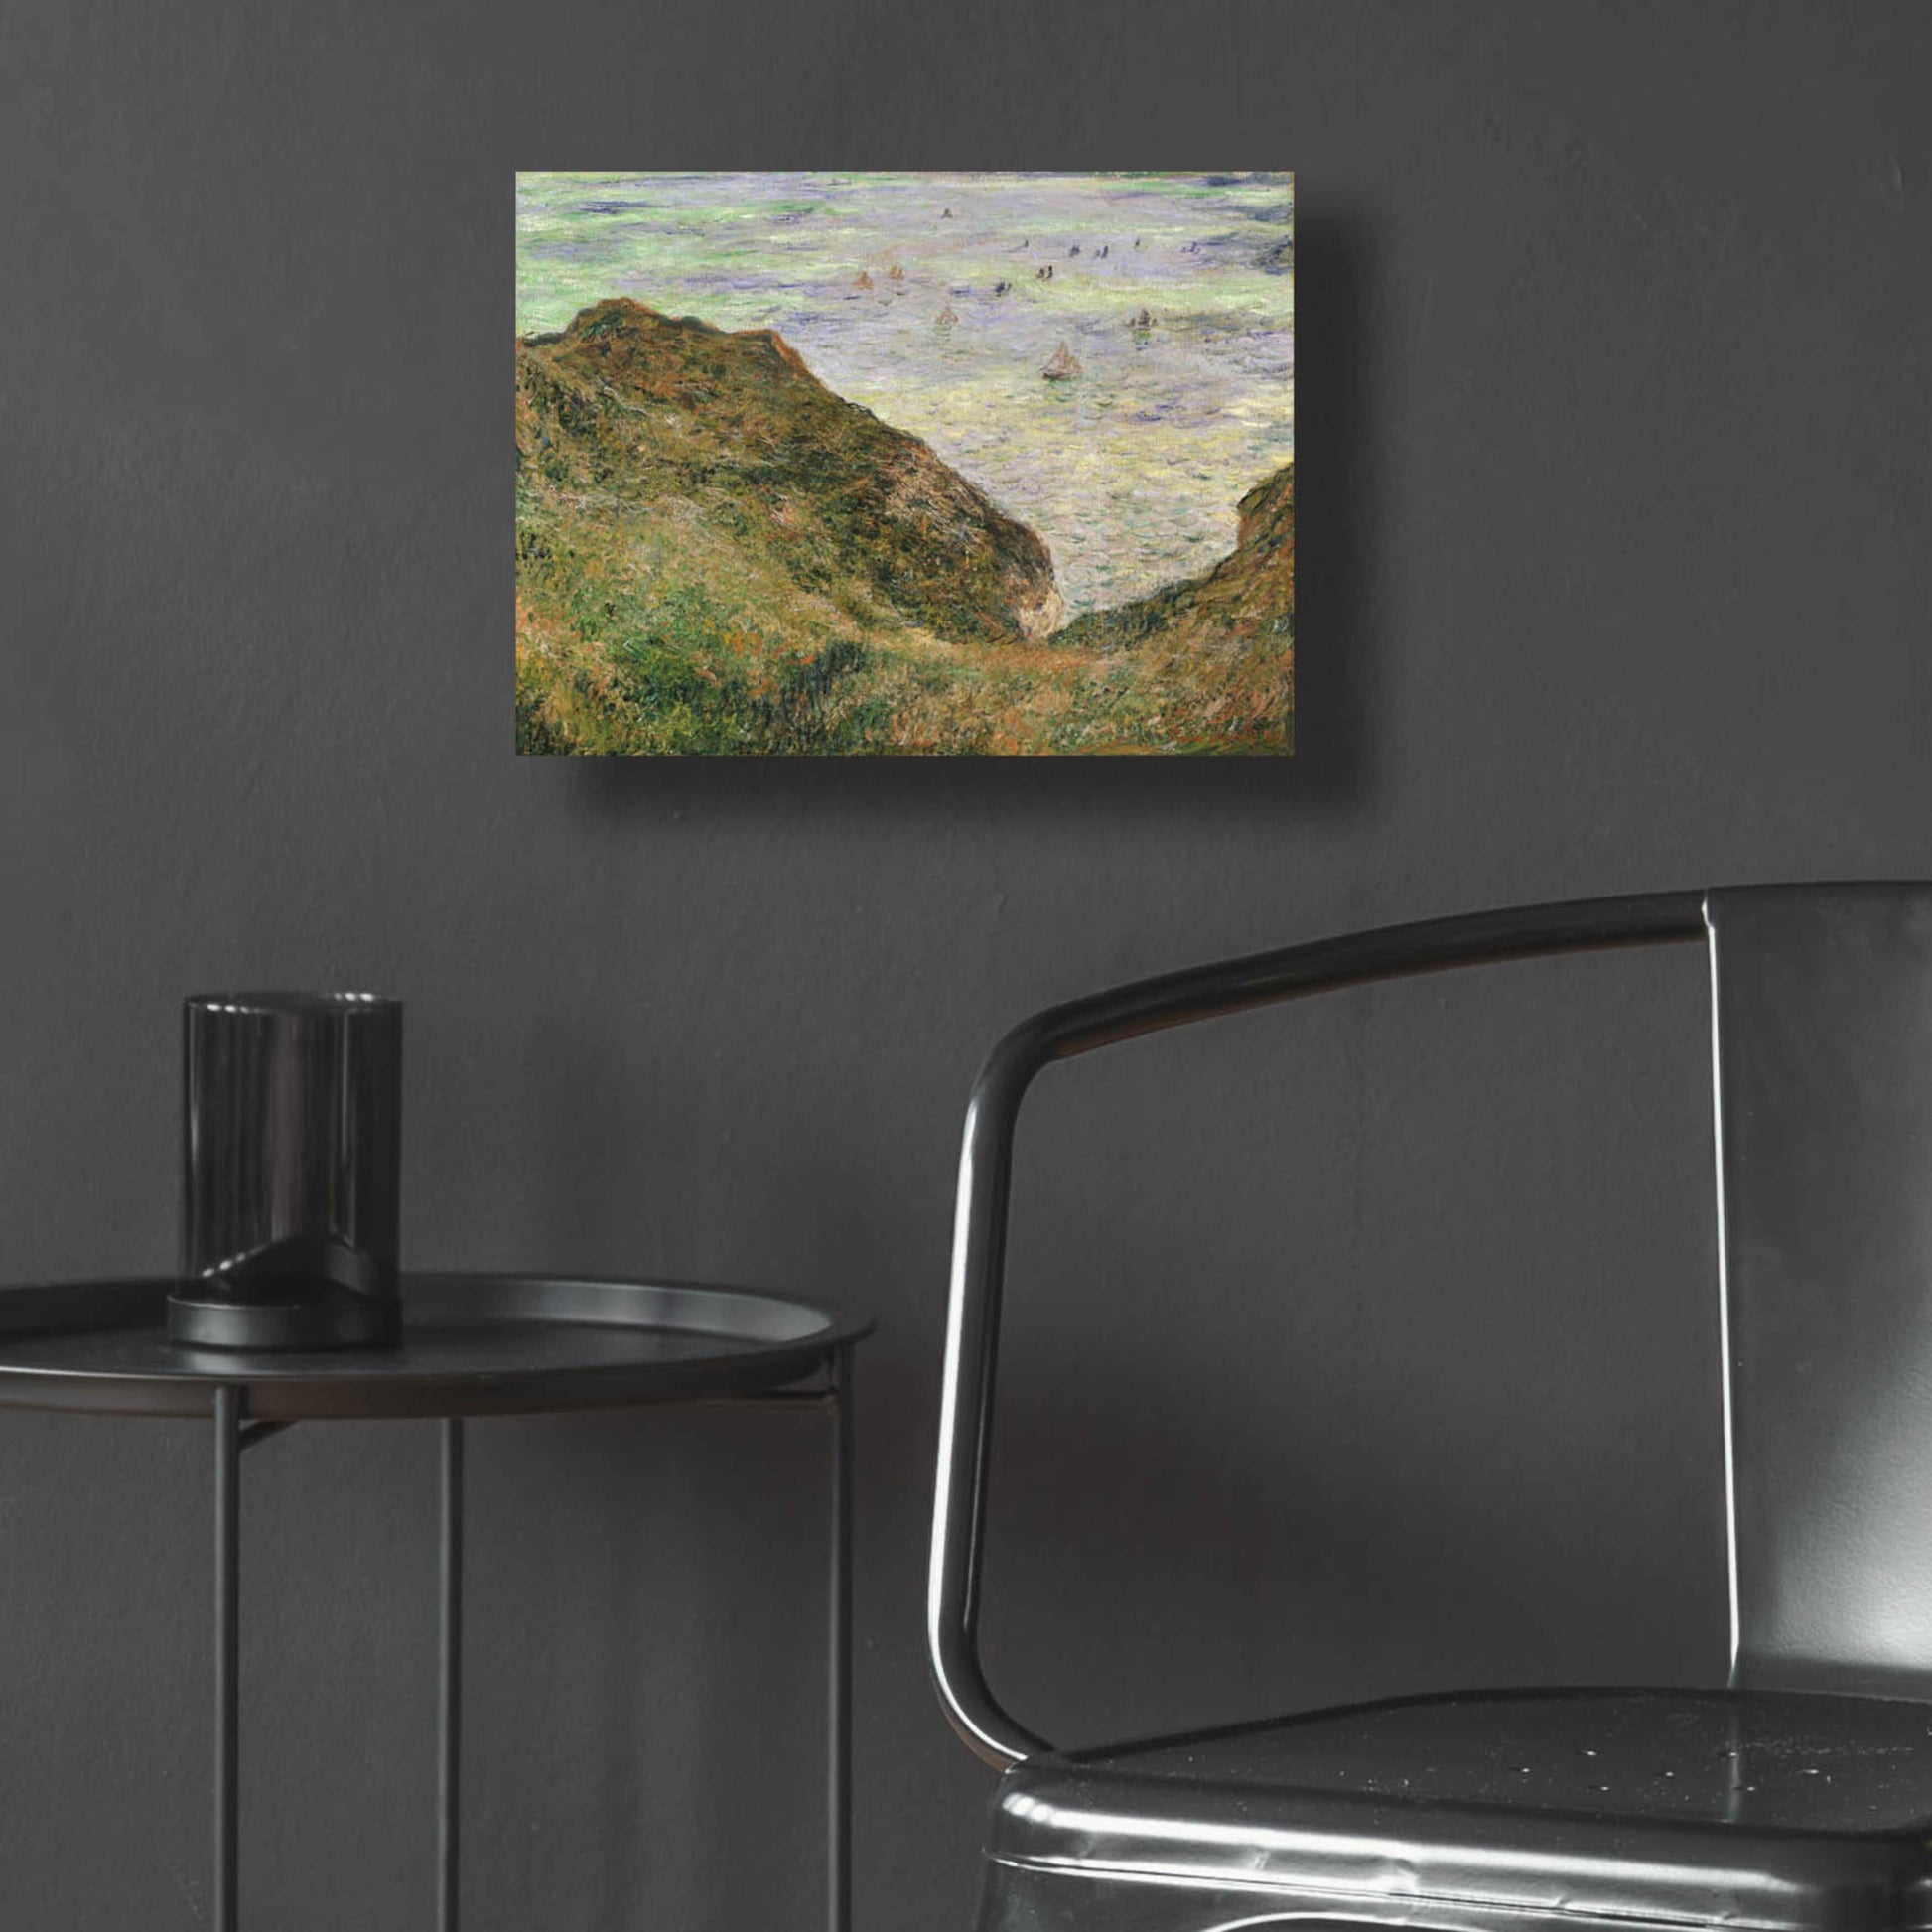 Epic Art 'View Over The Sea' by Claude Monet, Acrylic Glass Wall Art,16x12